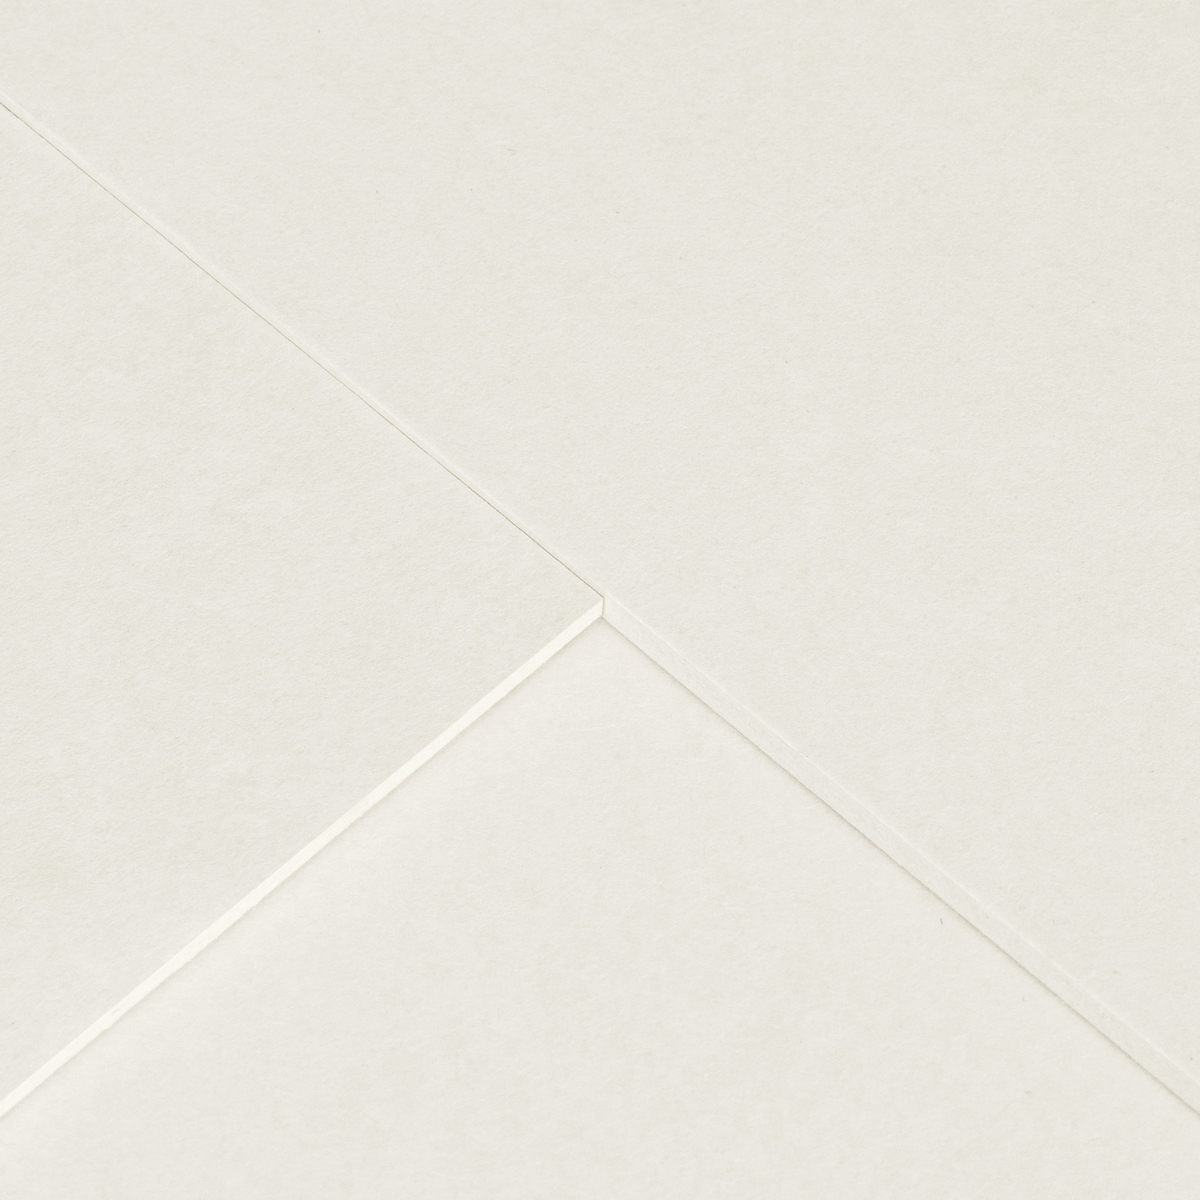 Paperboard KROMA Natural White edge view